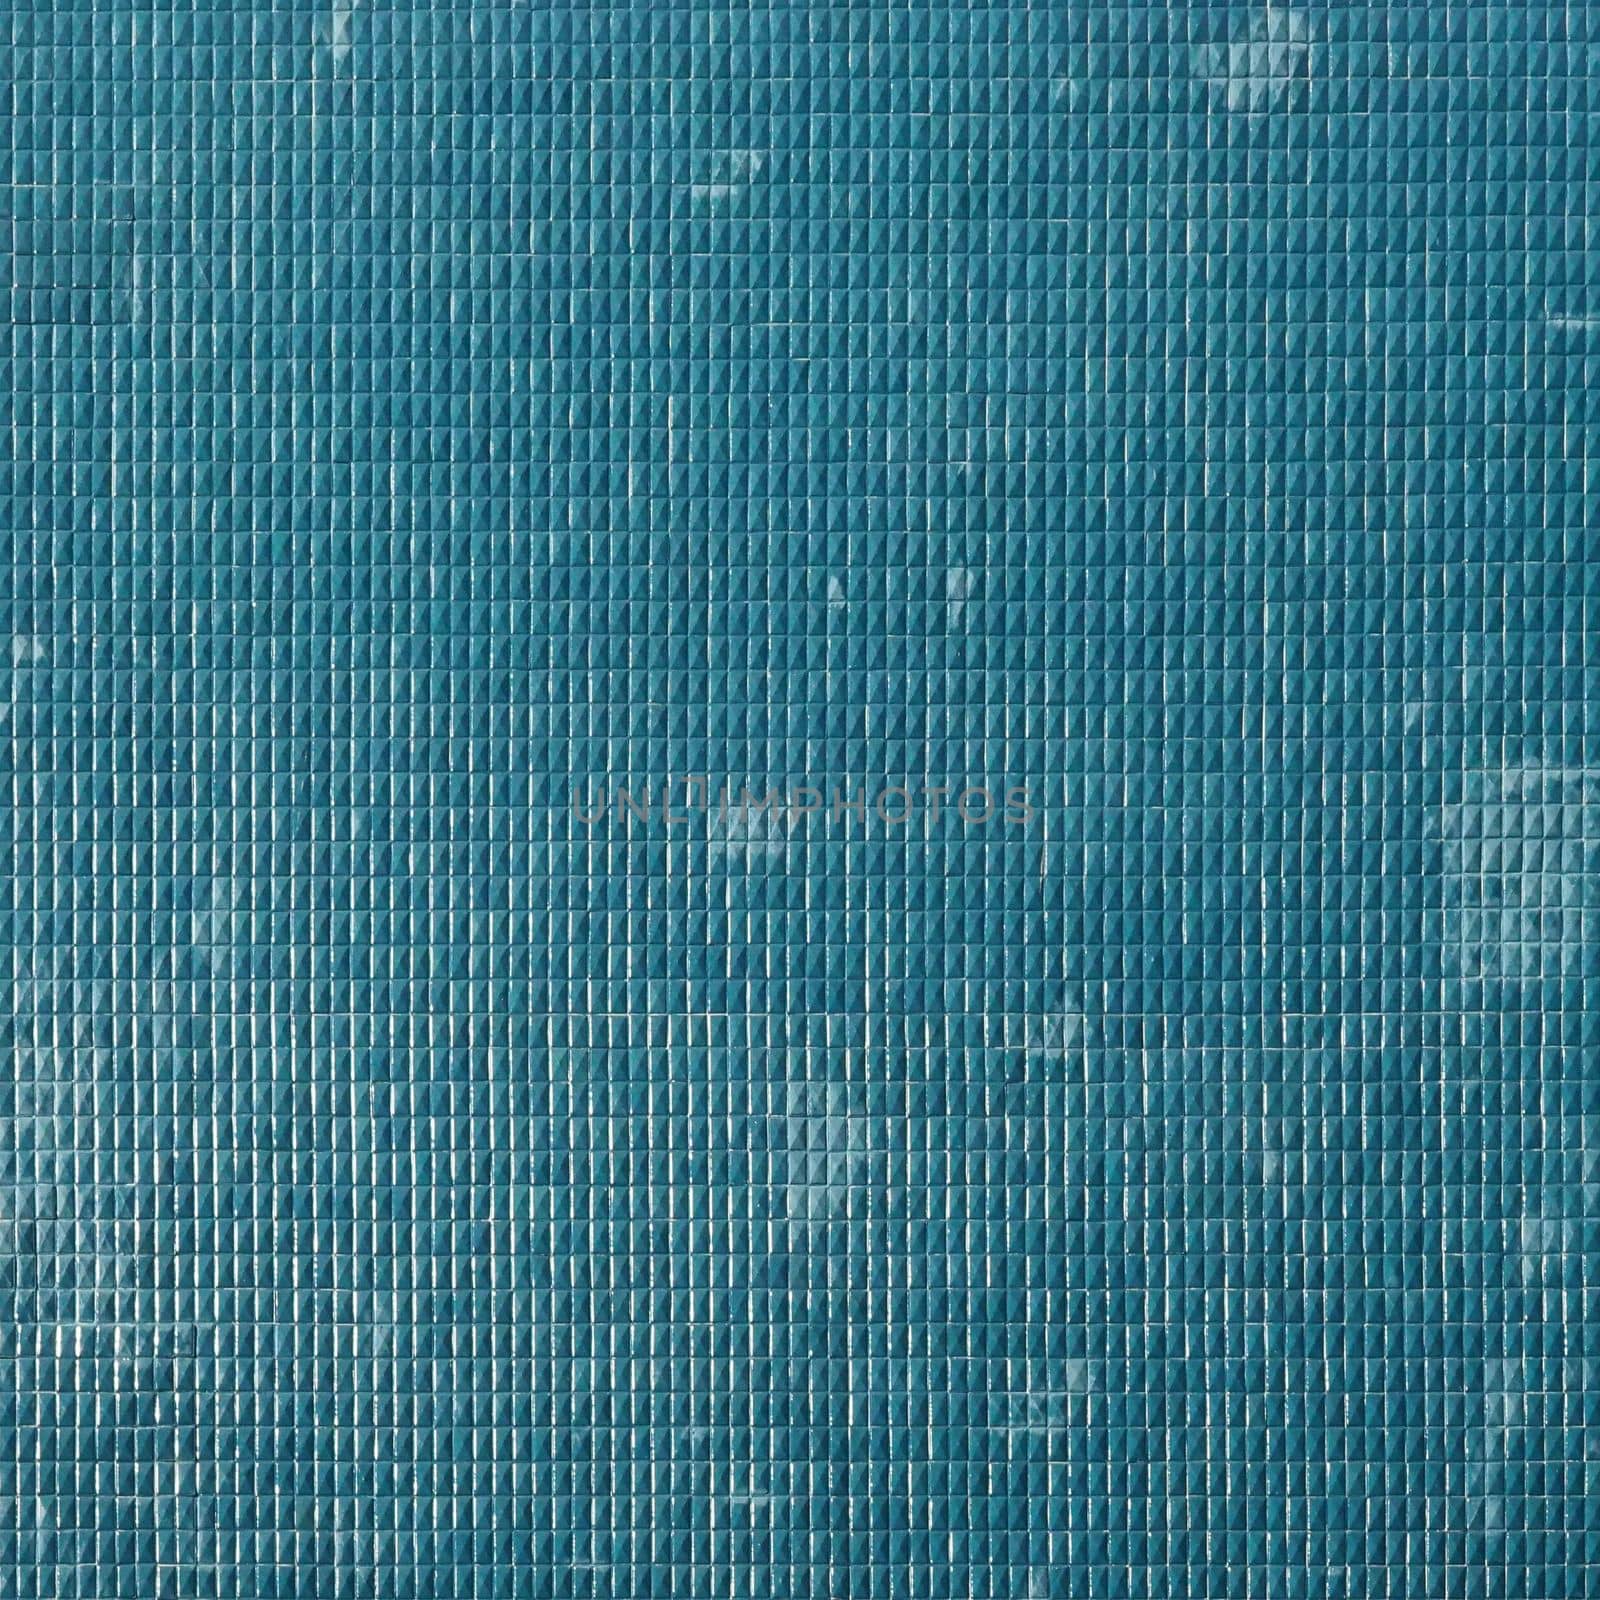 green blue tiles texture useful as a background